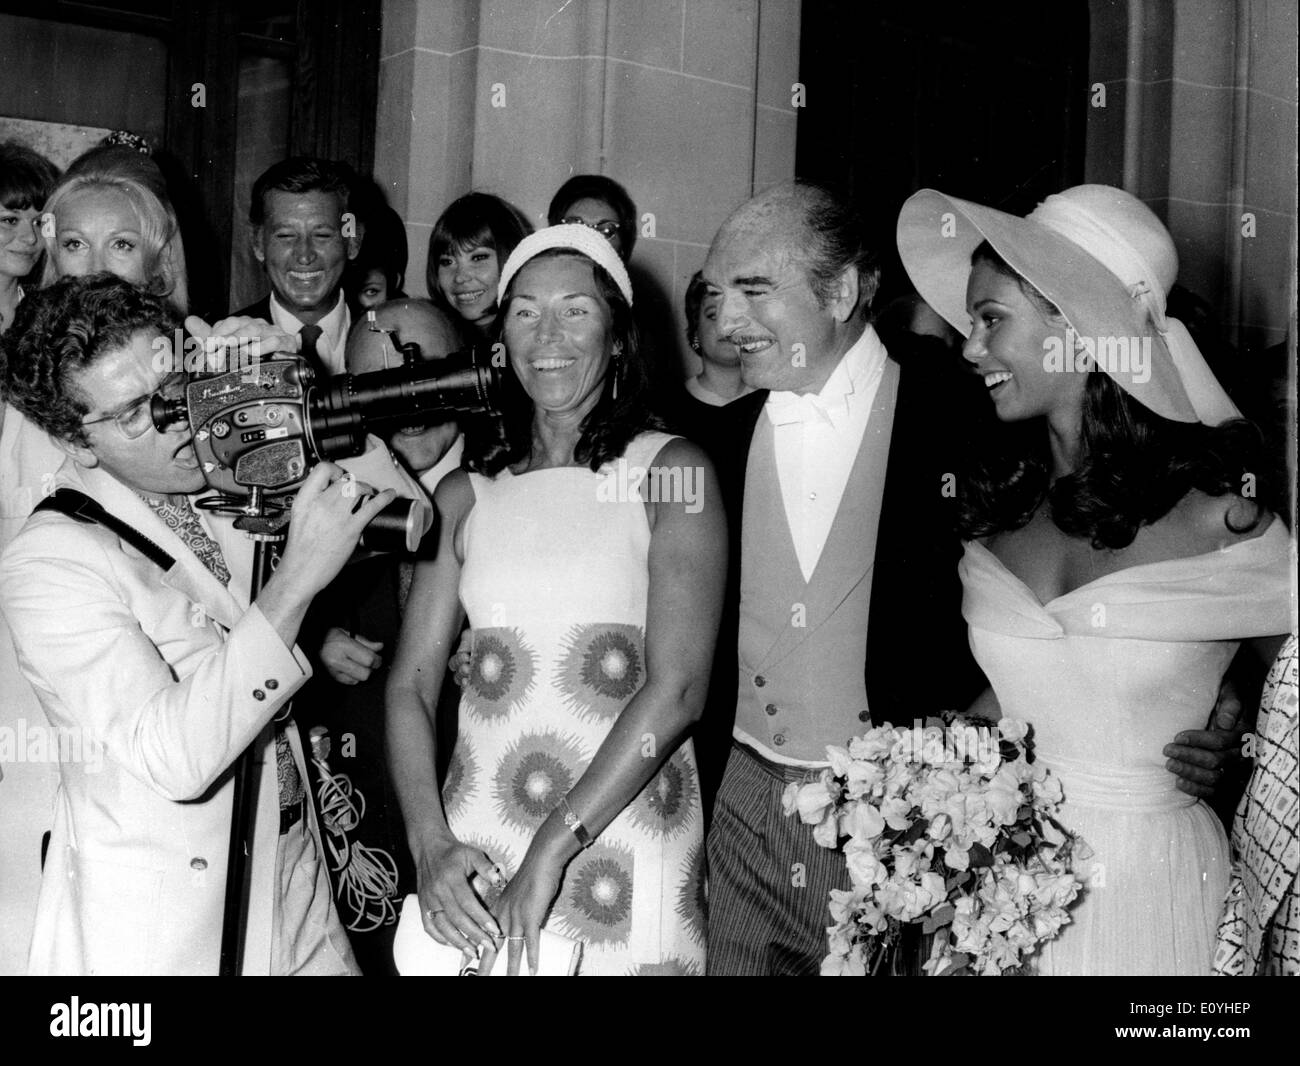 Jun 05, 1970; Paris, France; The famous French magnat EDDIE BARCLAY got marry for the fourth time at the Marie VIII in Paris with the young 18 year old BEATRICE CHATELIER. The picture shows the film producer DARRY COWL (L) filming the just married after the ceremony. Stock Photo